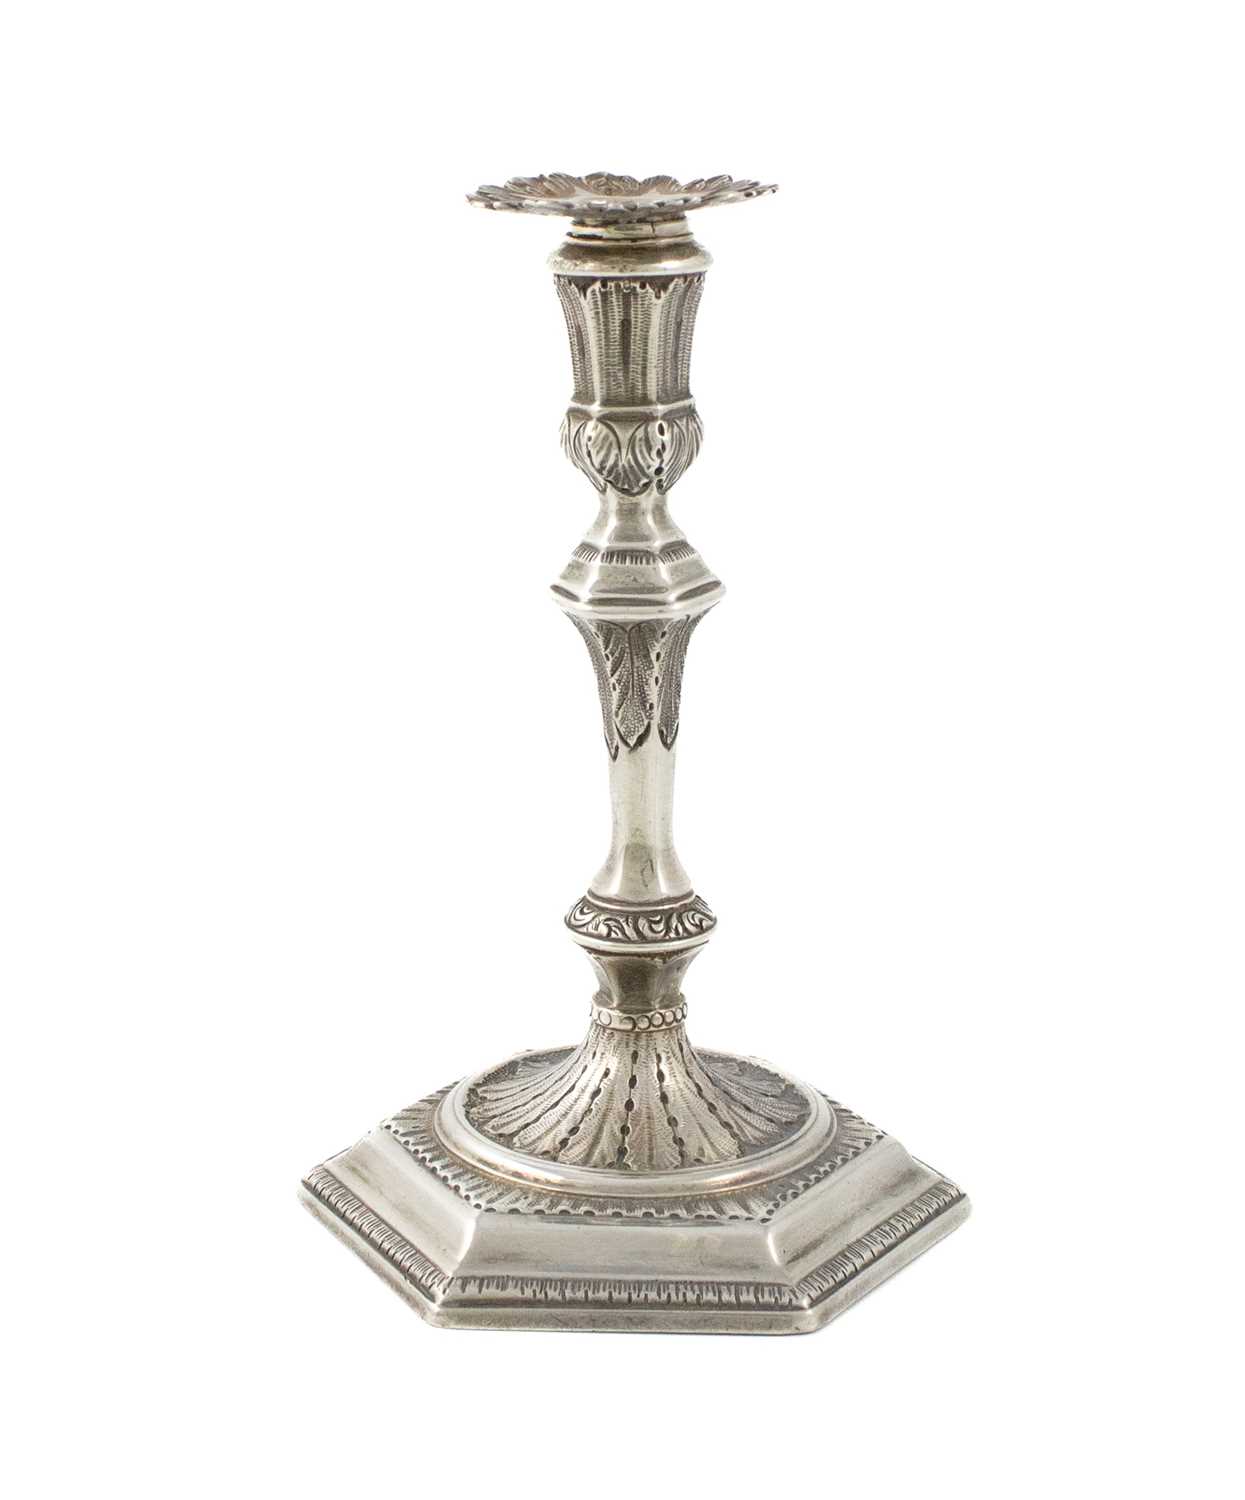 A George II silver taperstick, by James Gould, London 1731, tapering and knopped form, acanthus leaf